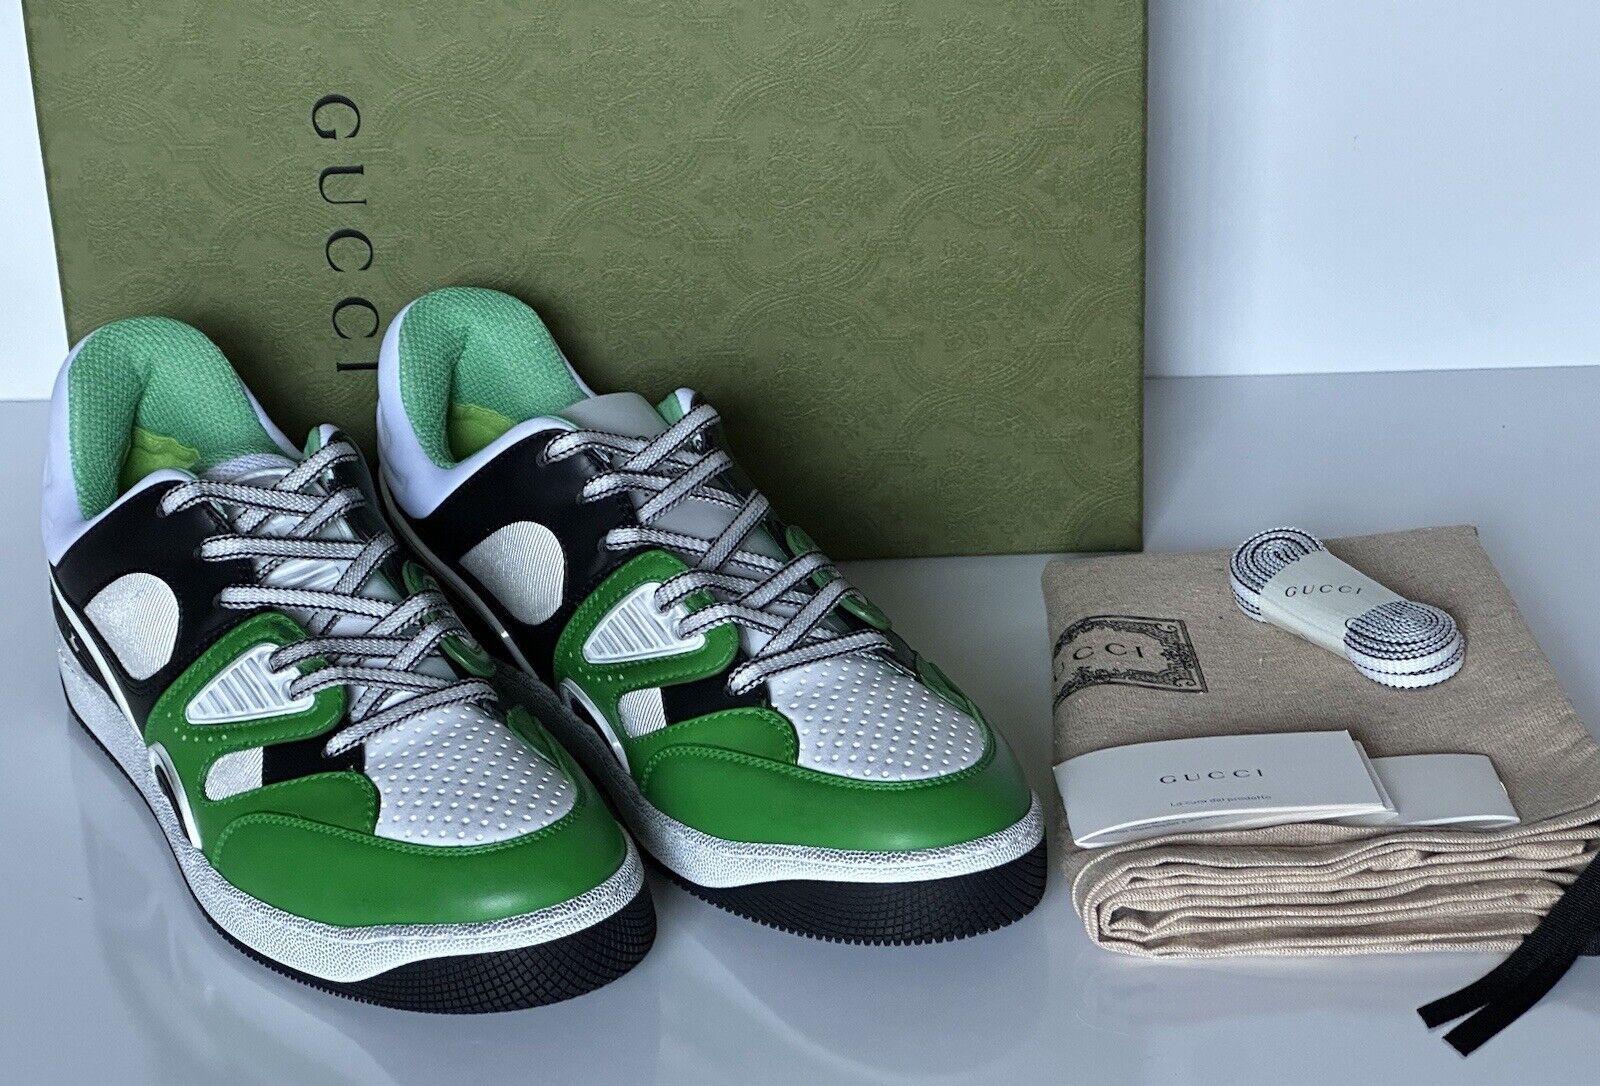 NIB Gucci Men's Low-top White/Green Leather Sneakers 10.5 US (Gucci 10G) 697882